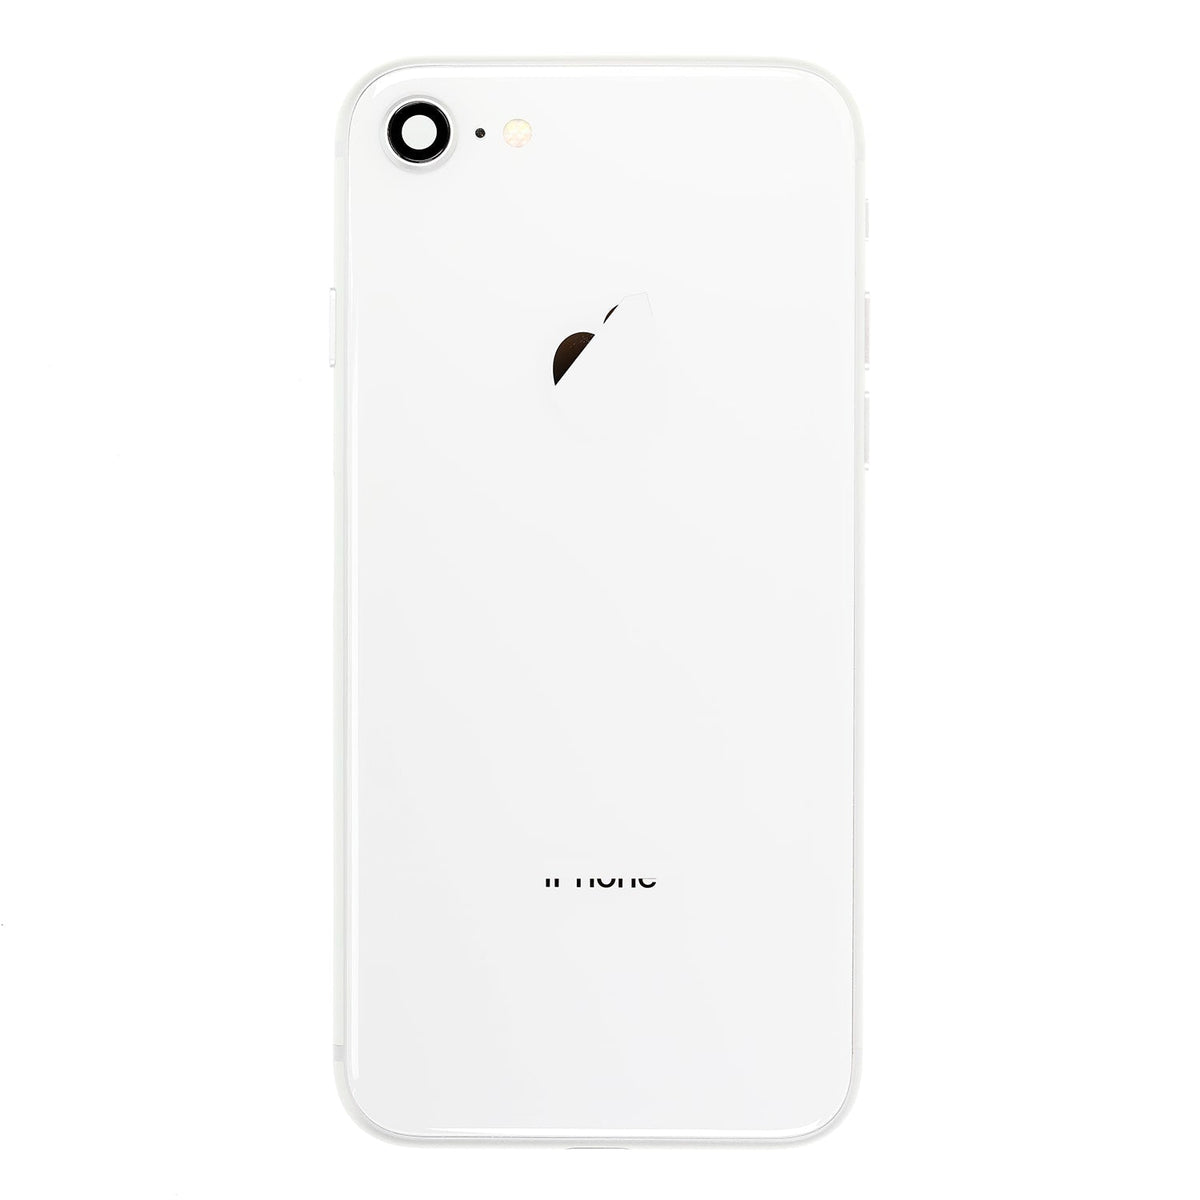 SILVER BACK COVER FULL ASSEMBLY FOR IPHONE 8